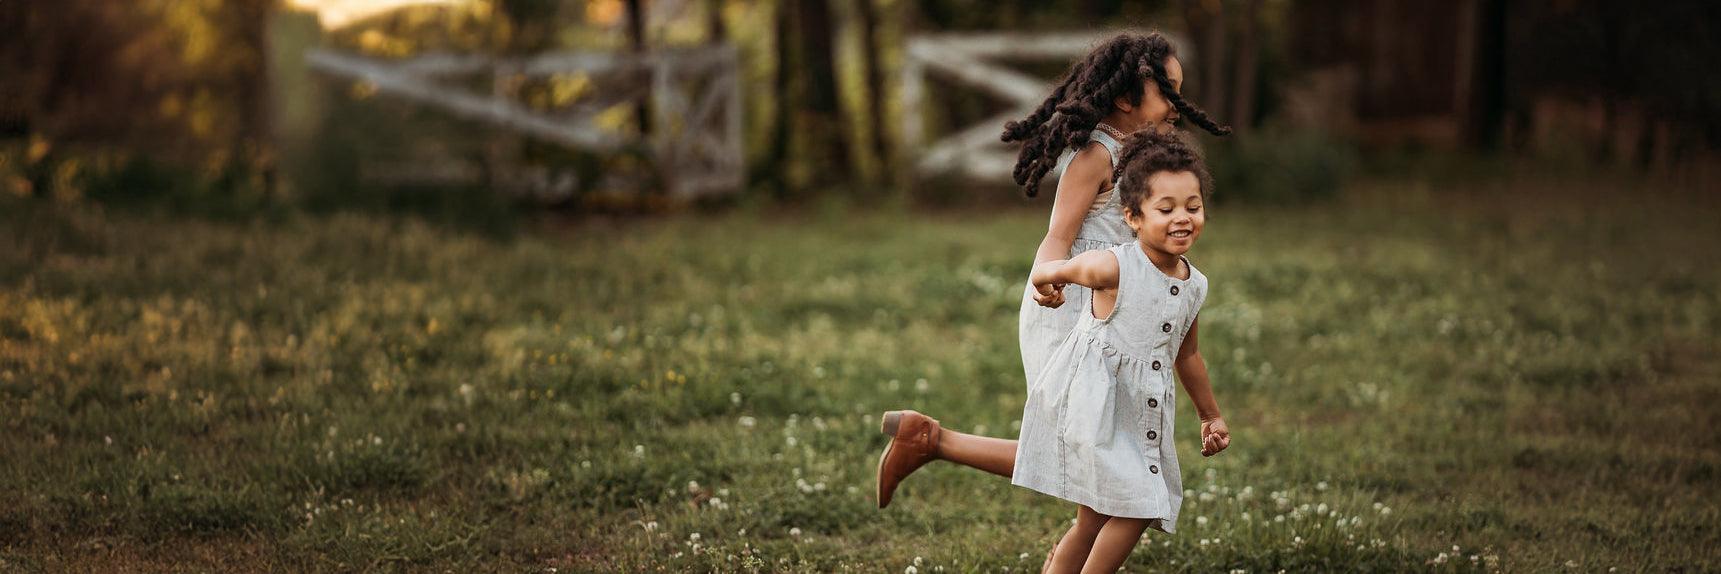 Two sisters holding hands while running through the yard